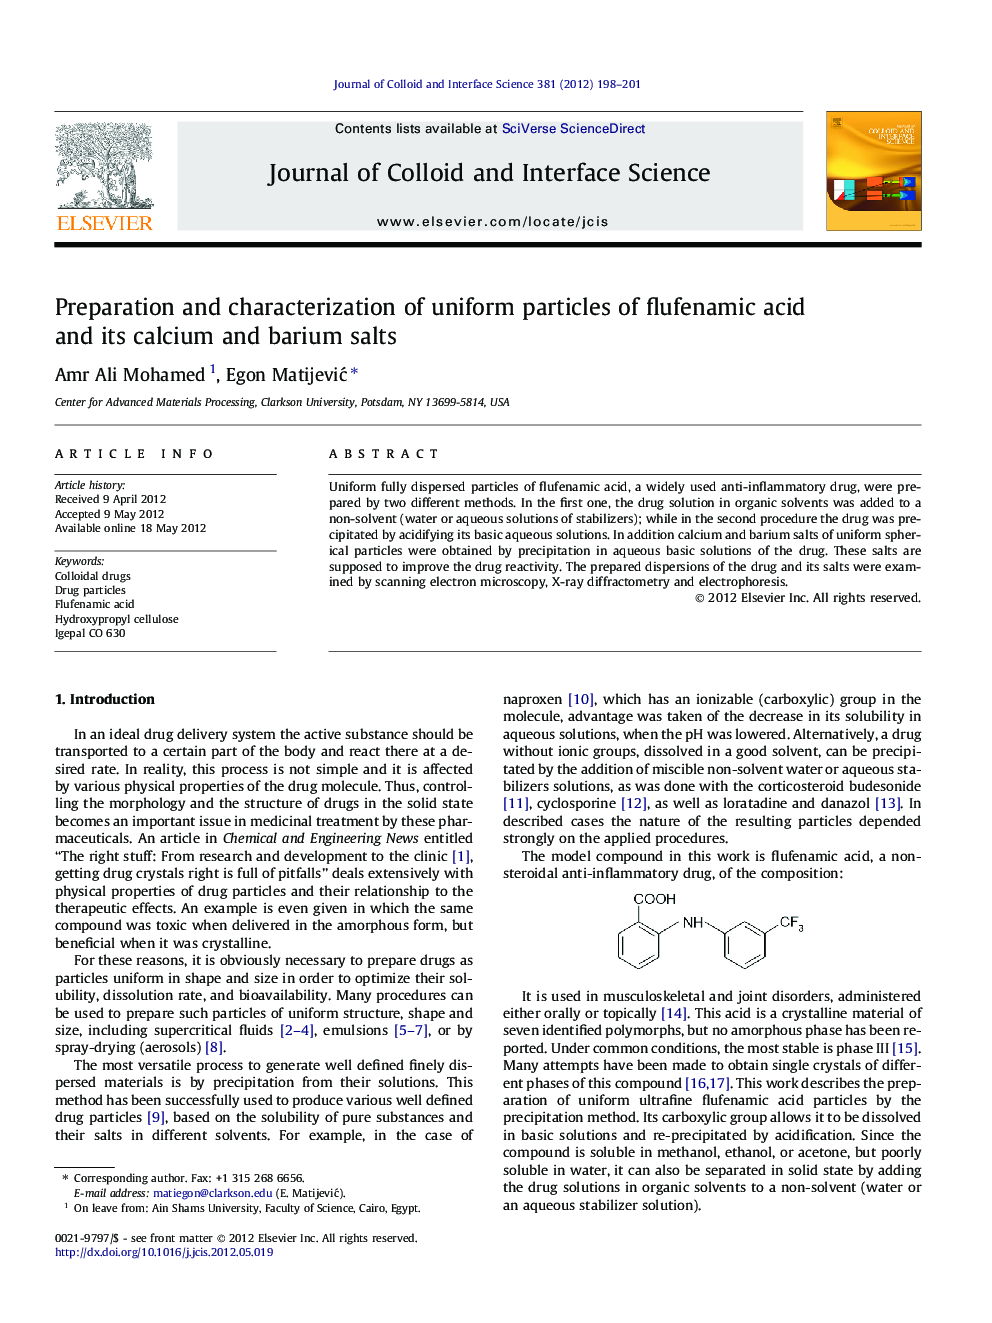 Preparation and characterization of uniform particles of flufenamic acid and its calcium and barium salts